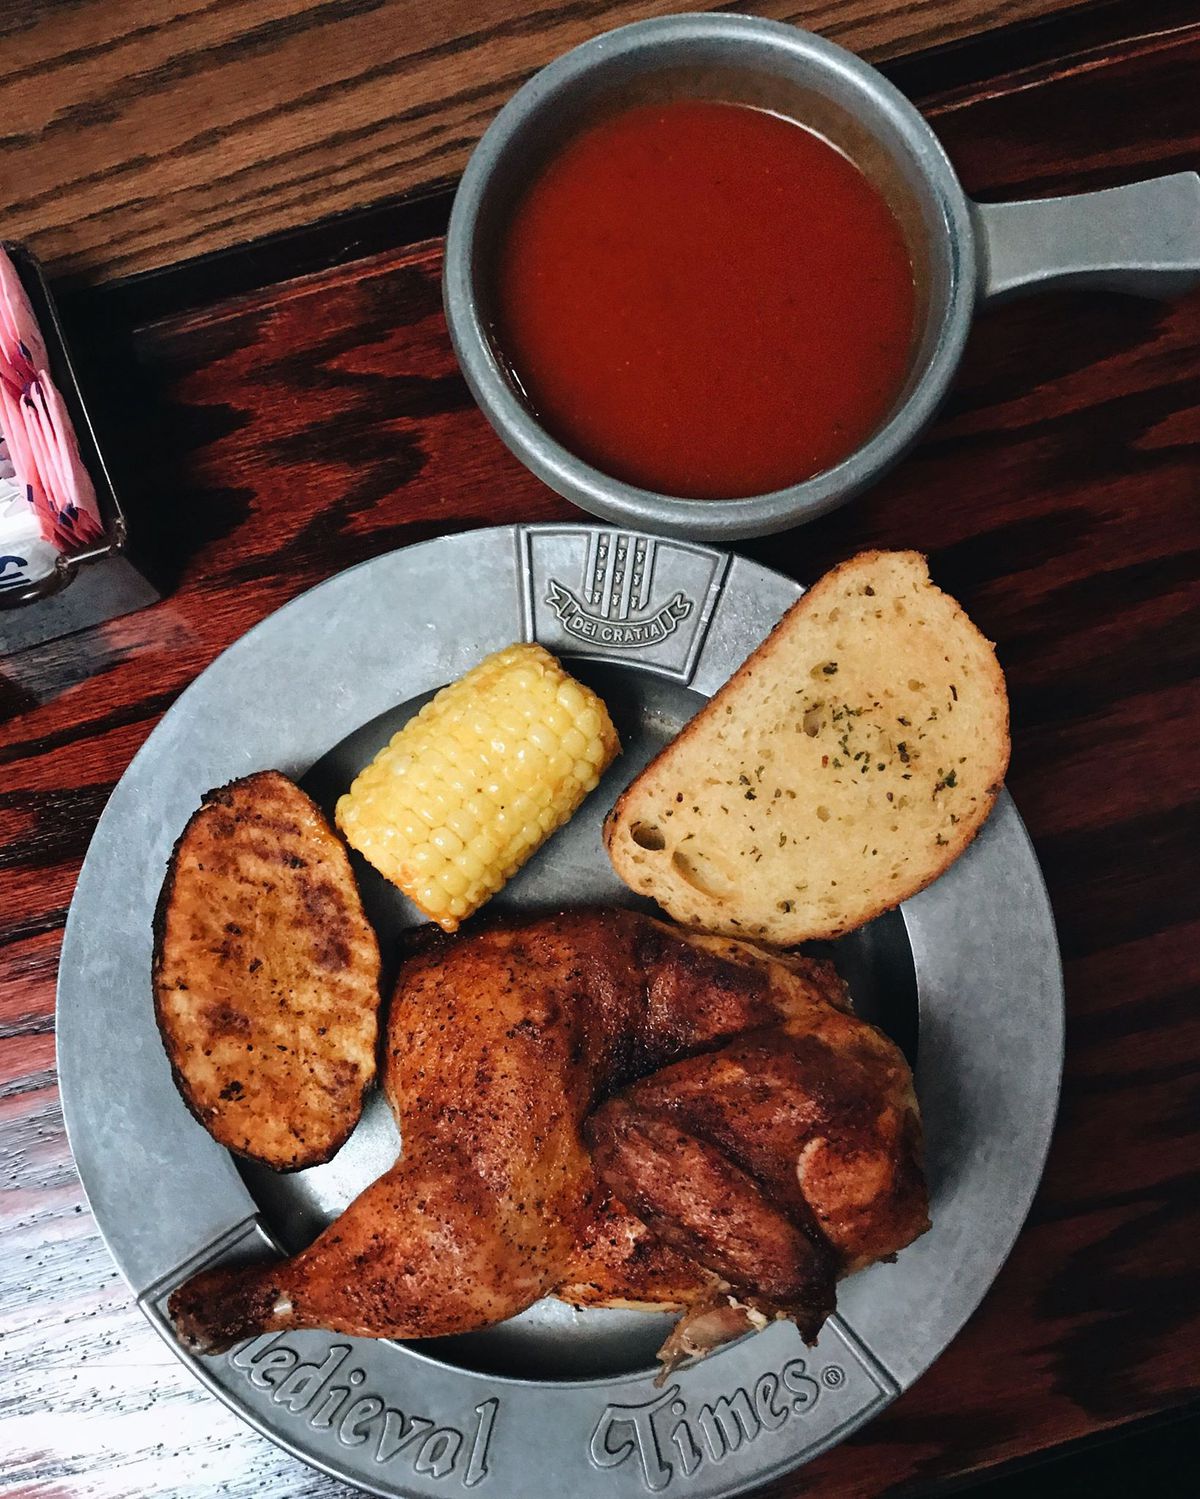 Plate with “Medieval Times” written on it containing a piece of bread, roasted chicken, corn, and half of a potato. A bowl sits alongside containing tomato soup.